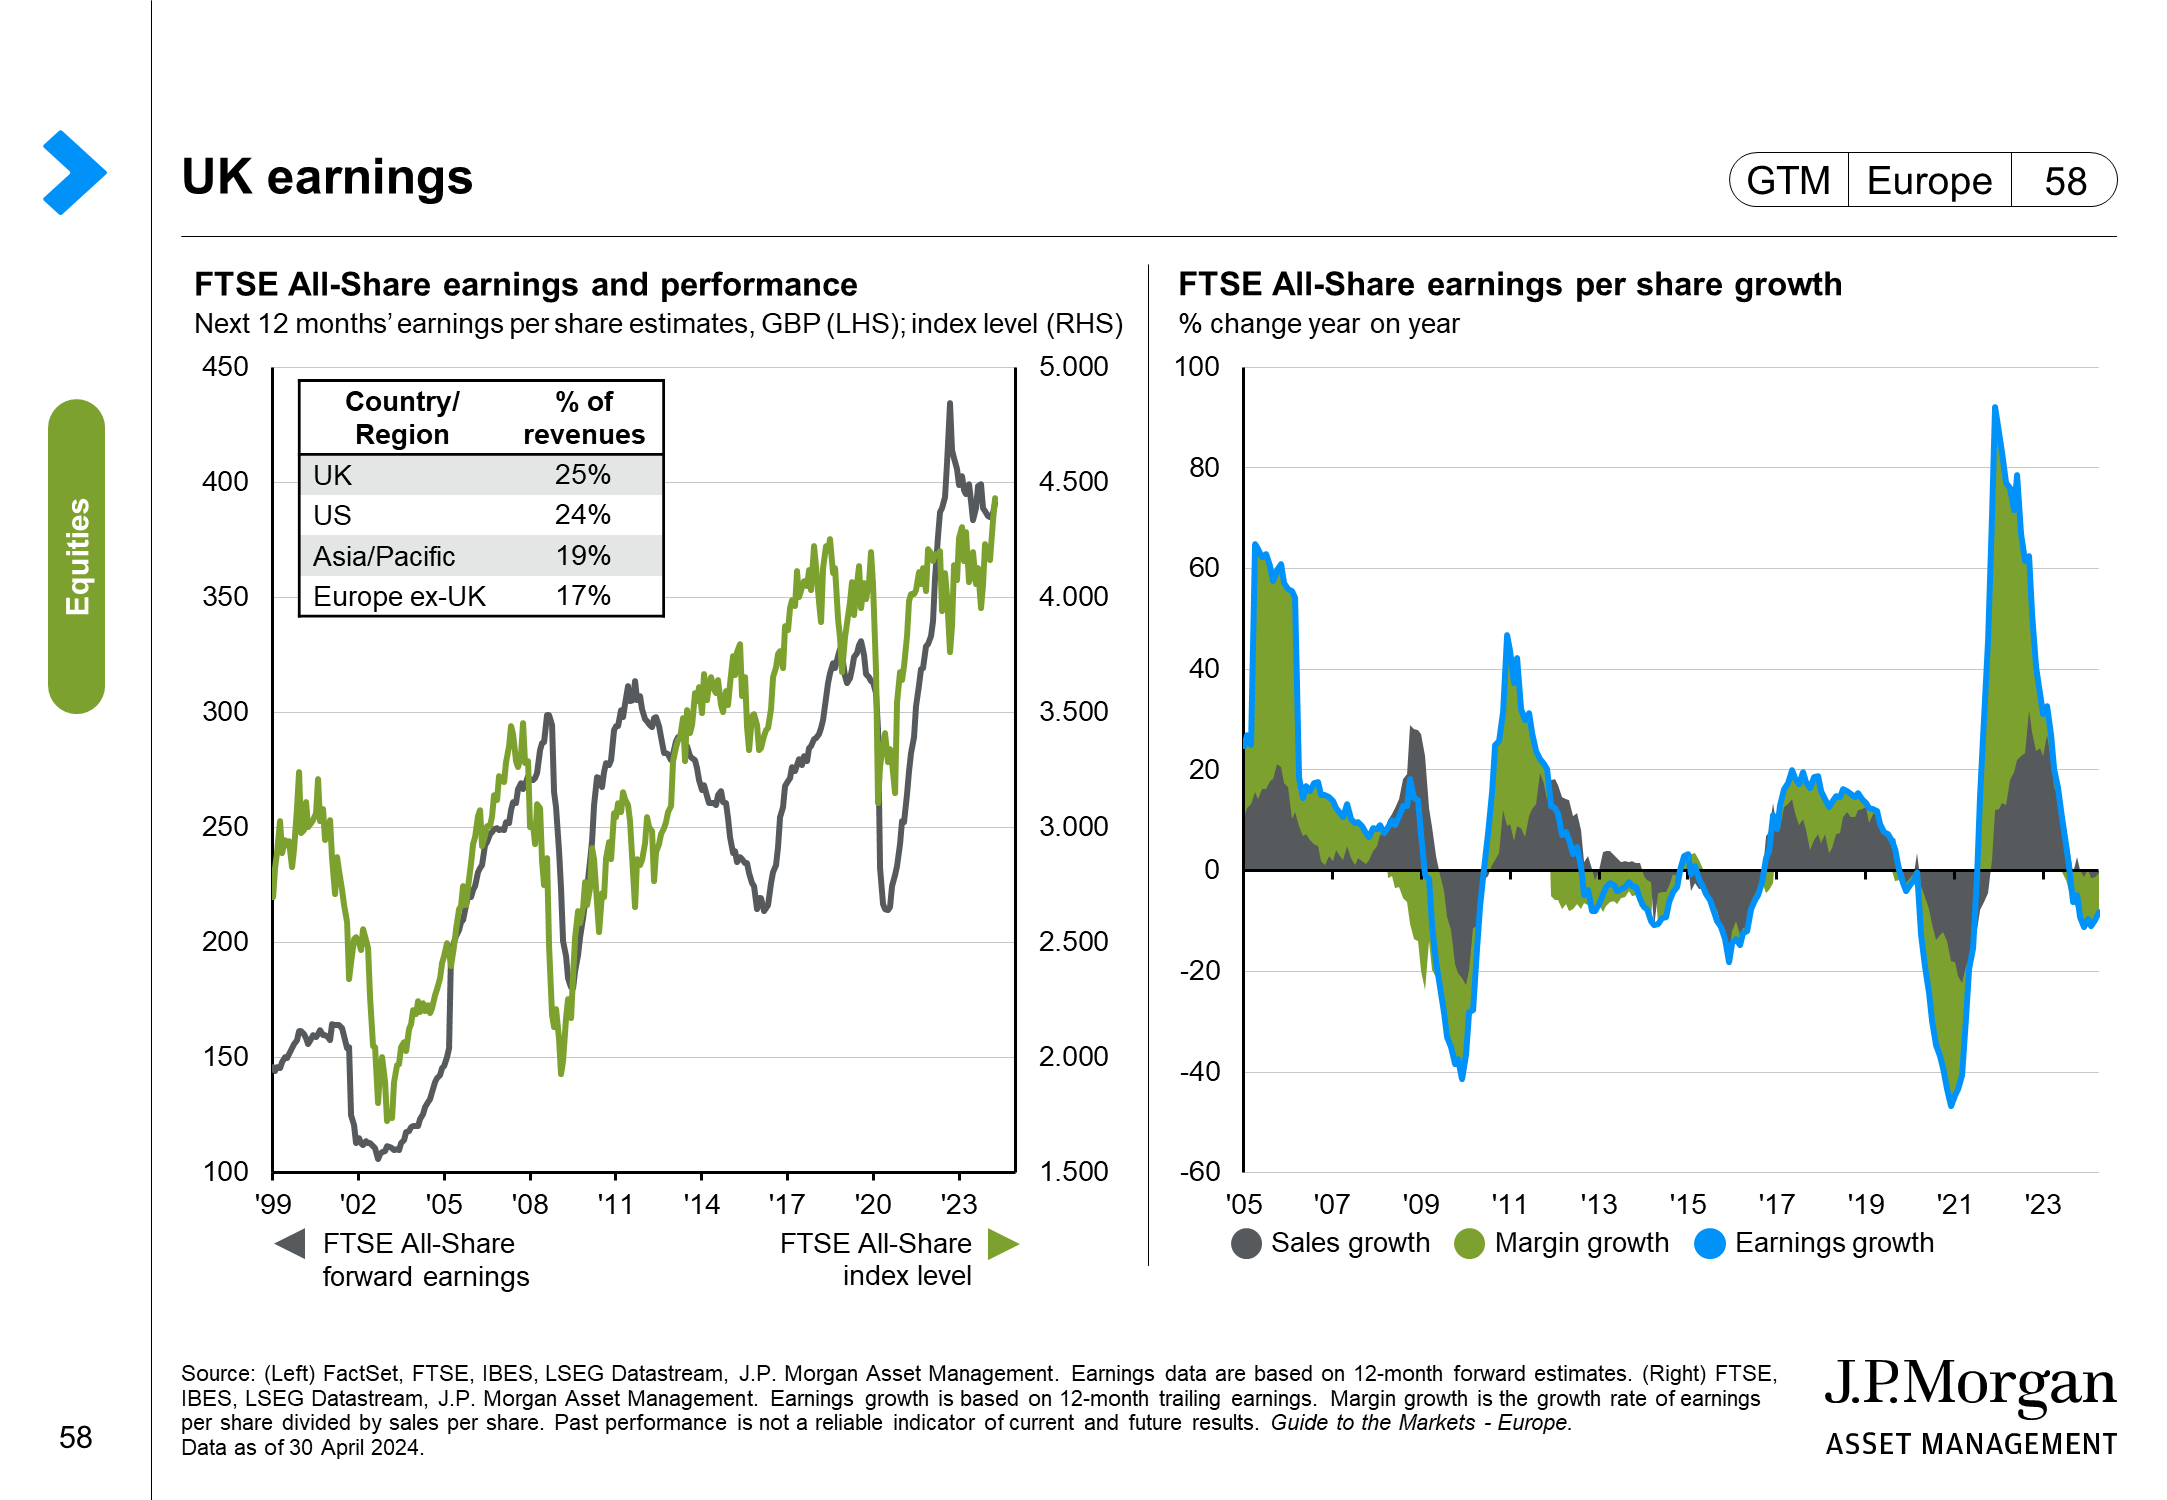 Europe large, mid and small capitalisation equities